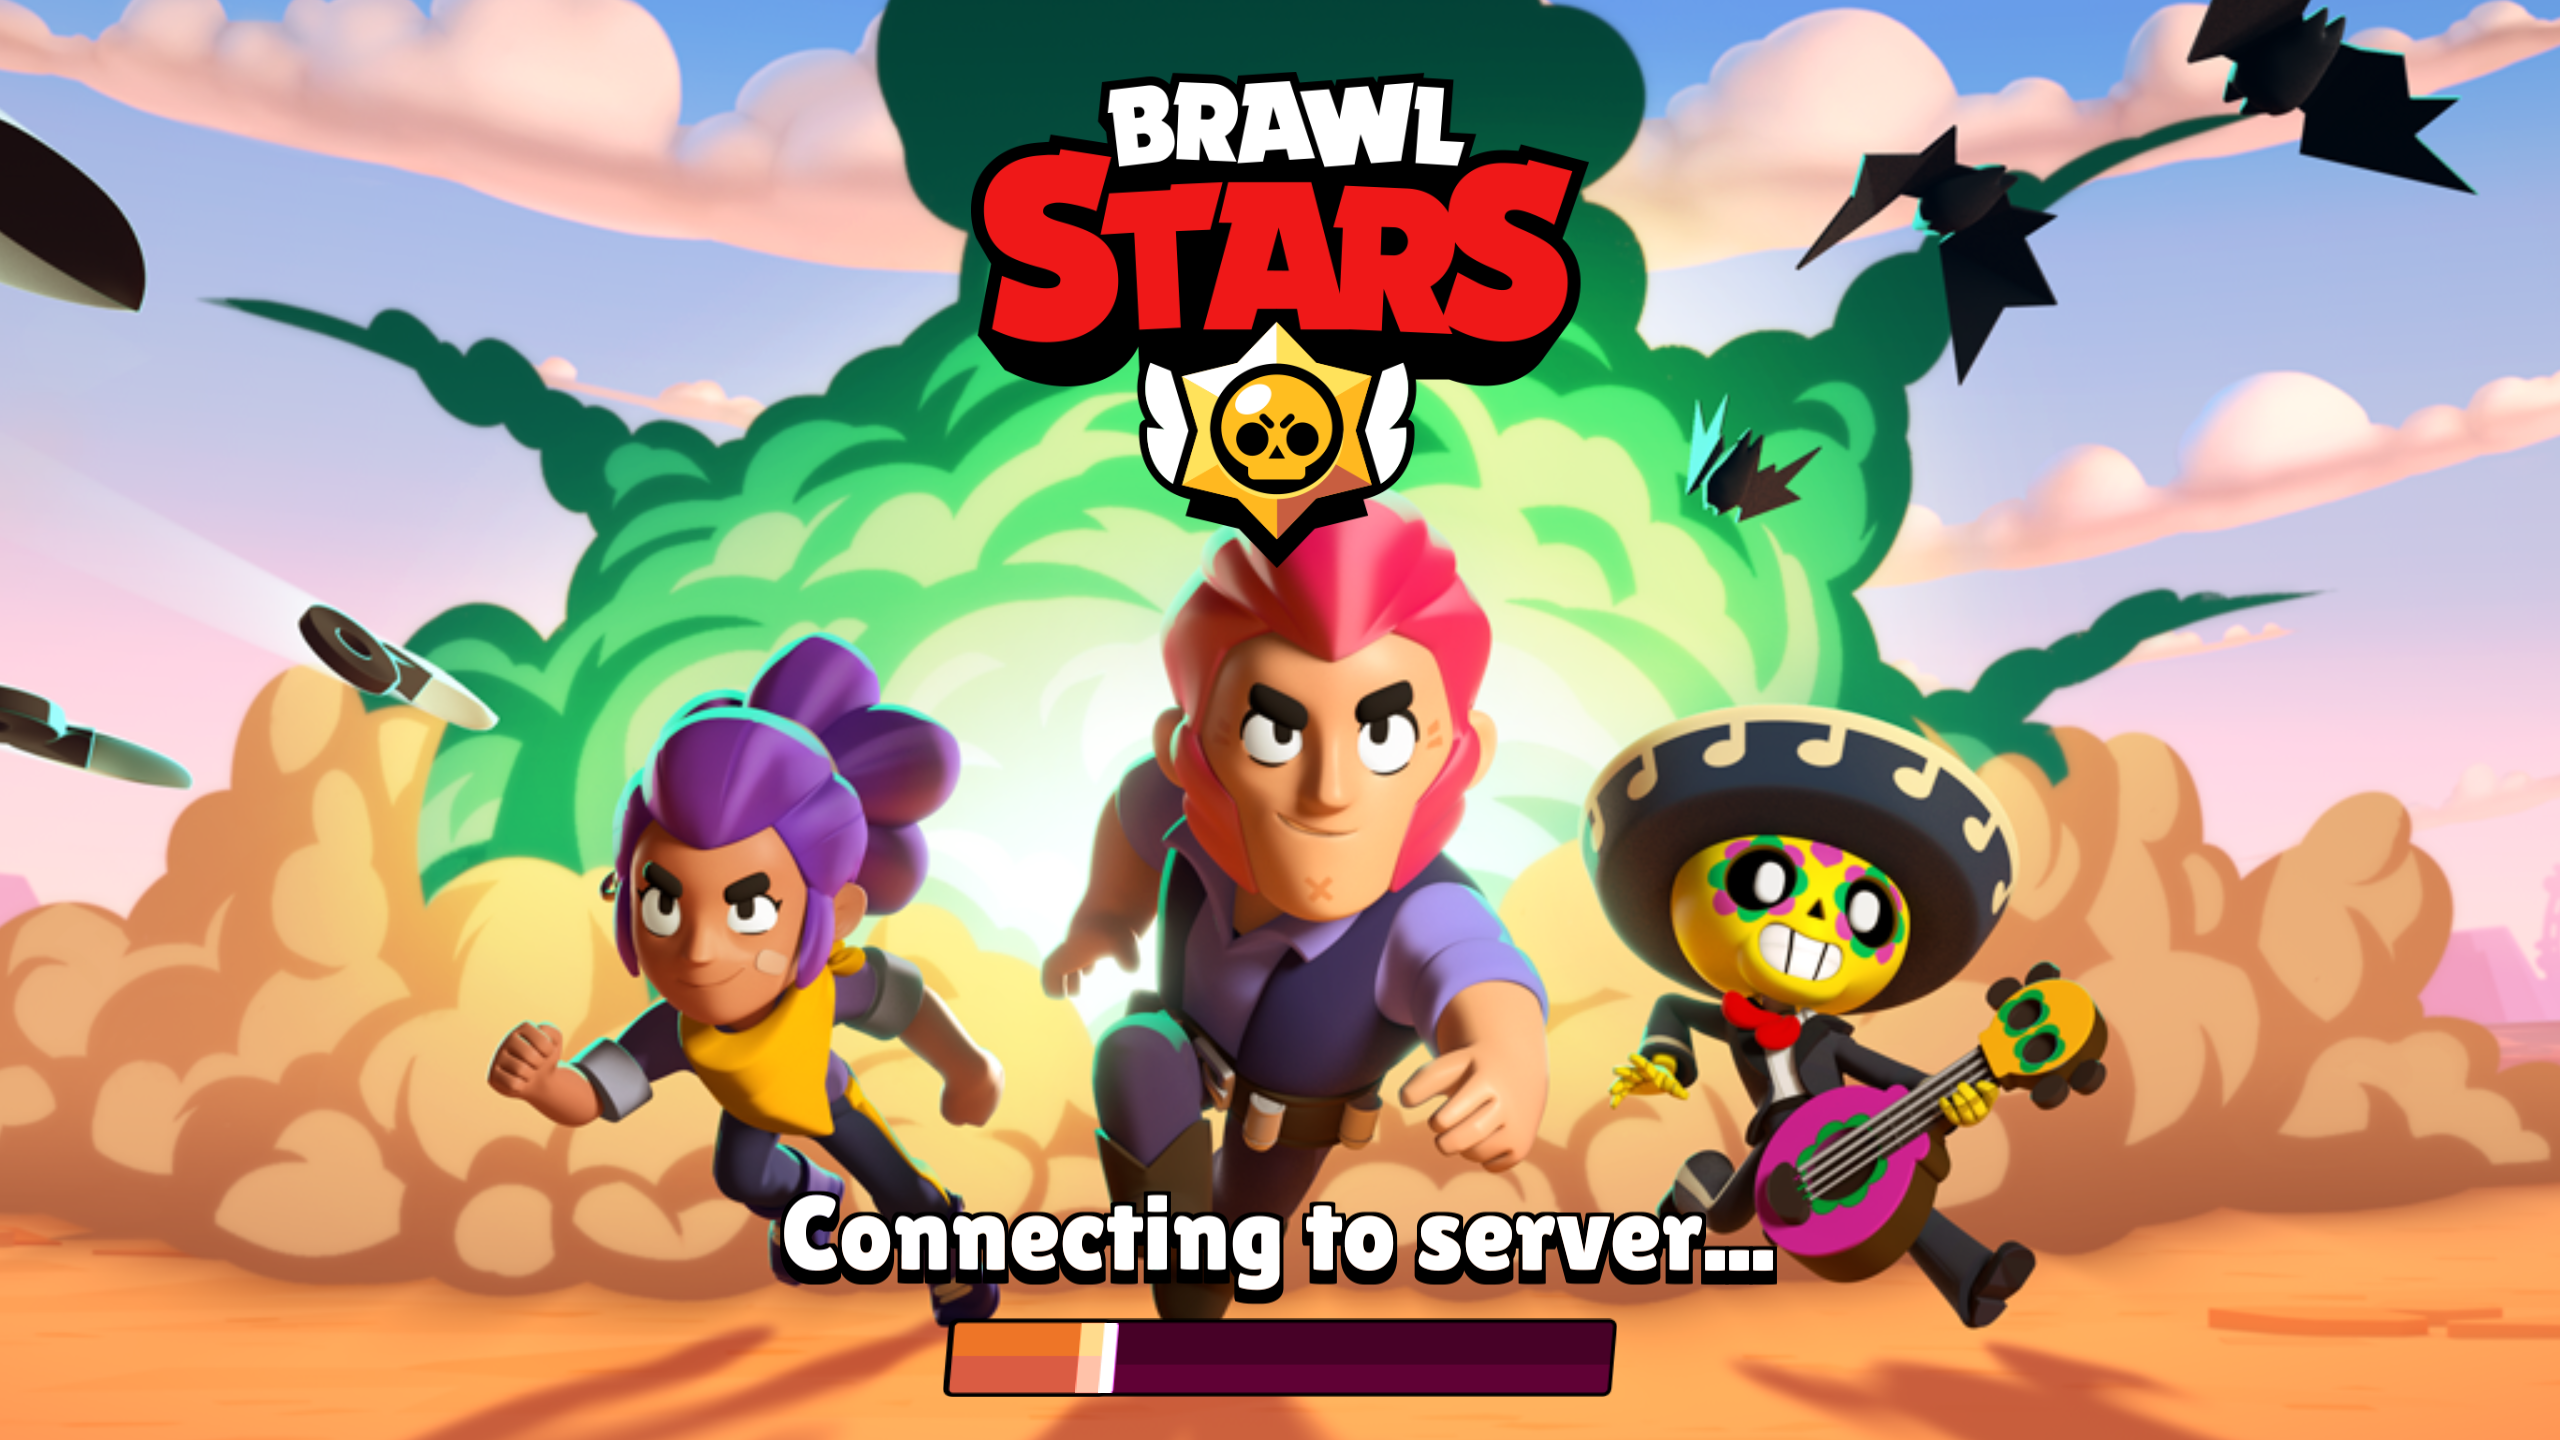 Anyone else think this loading screen is starting to get old and boring?